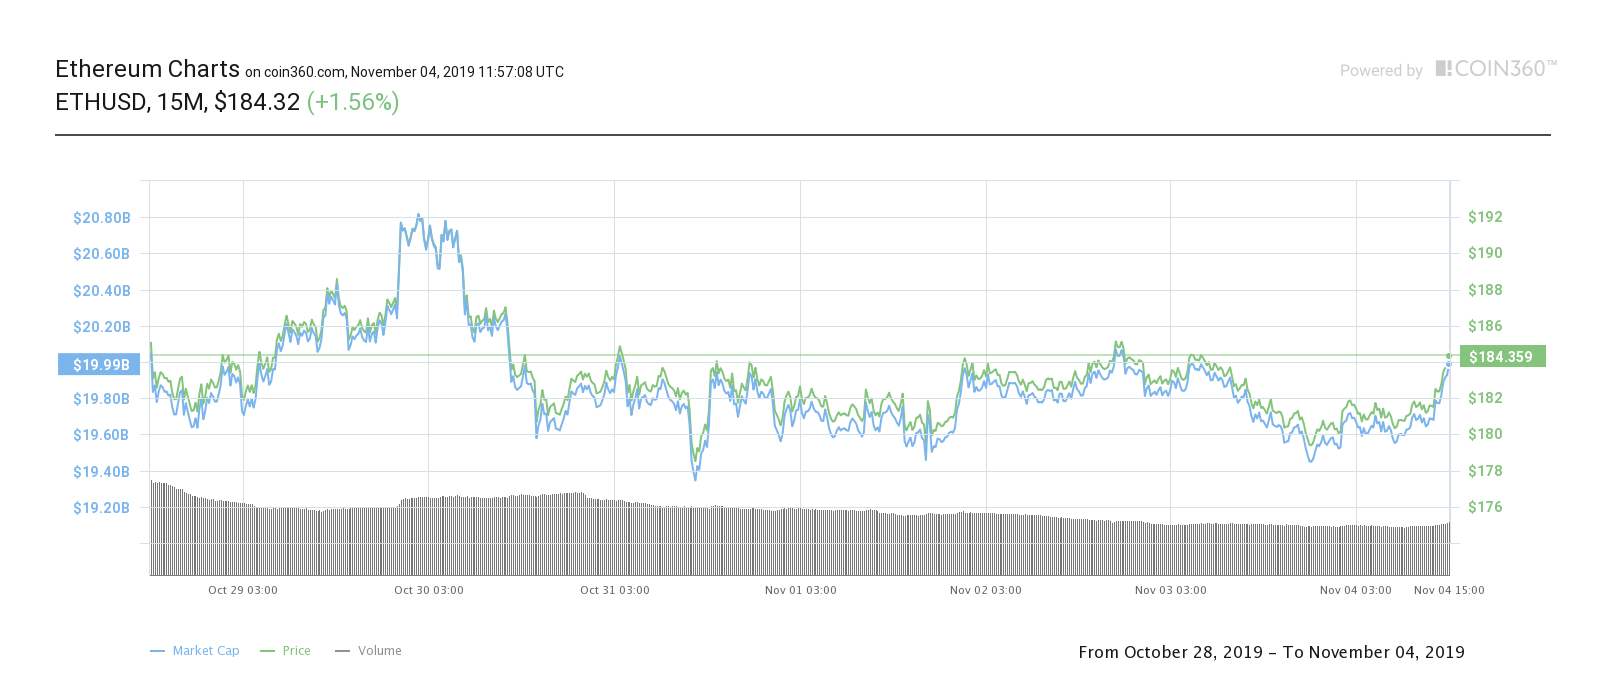 Ether seven-day price chart